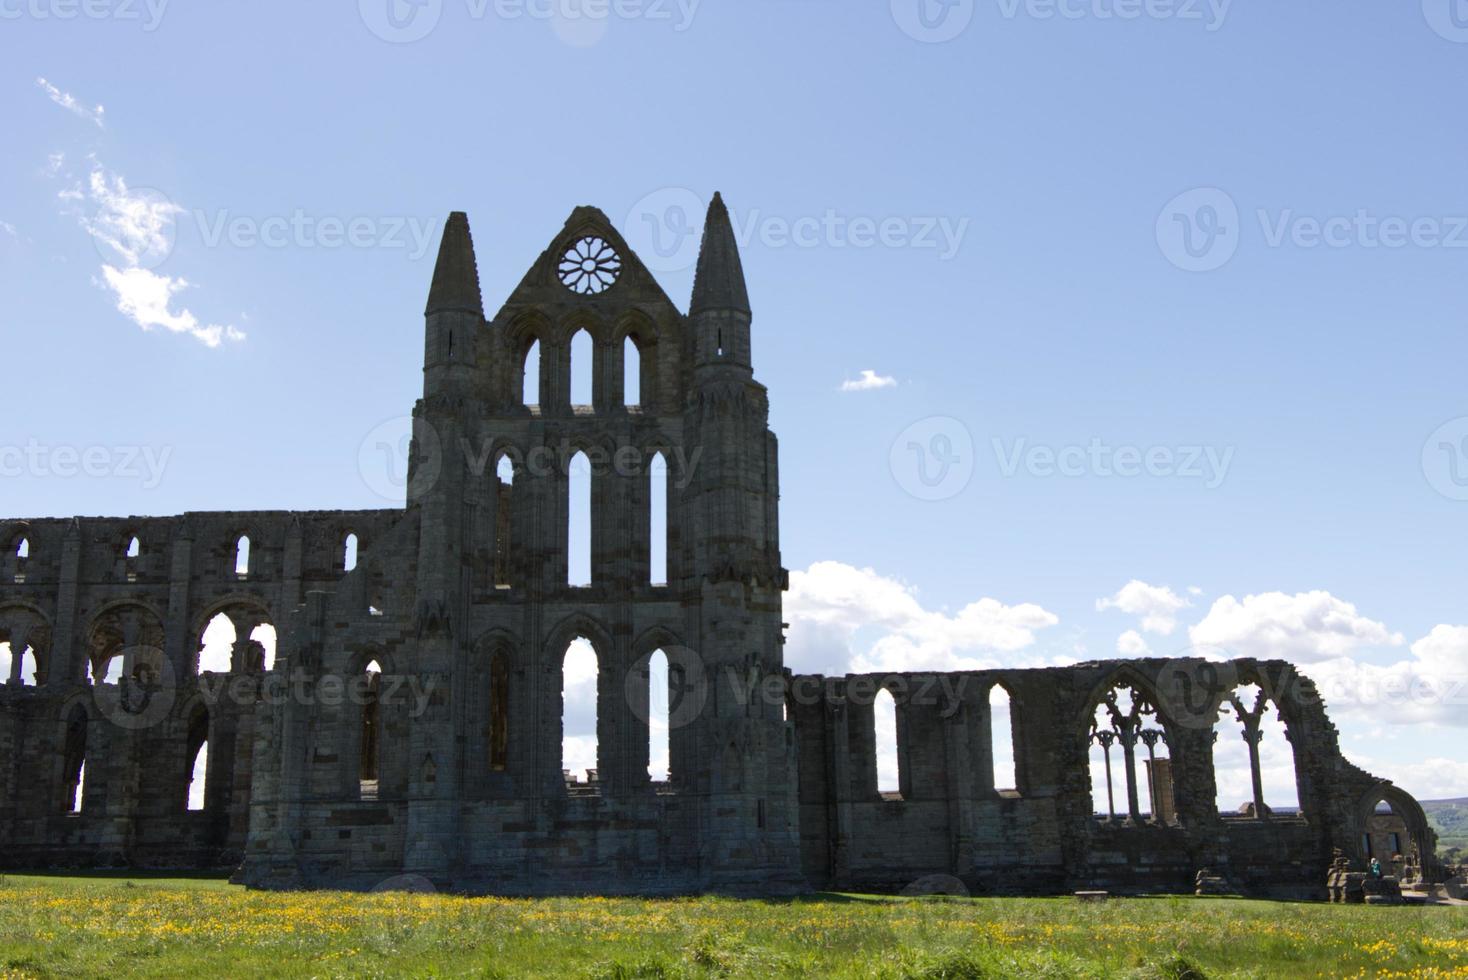 Whitby abbey ruins in north Yorkshire UK photo